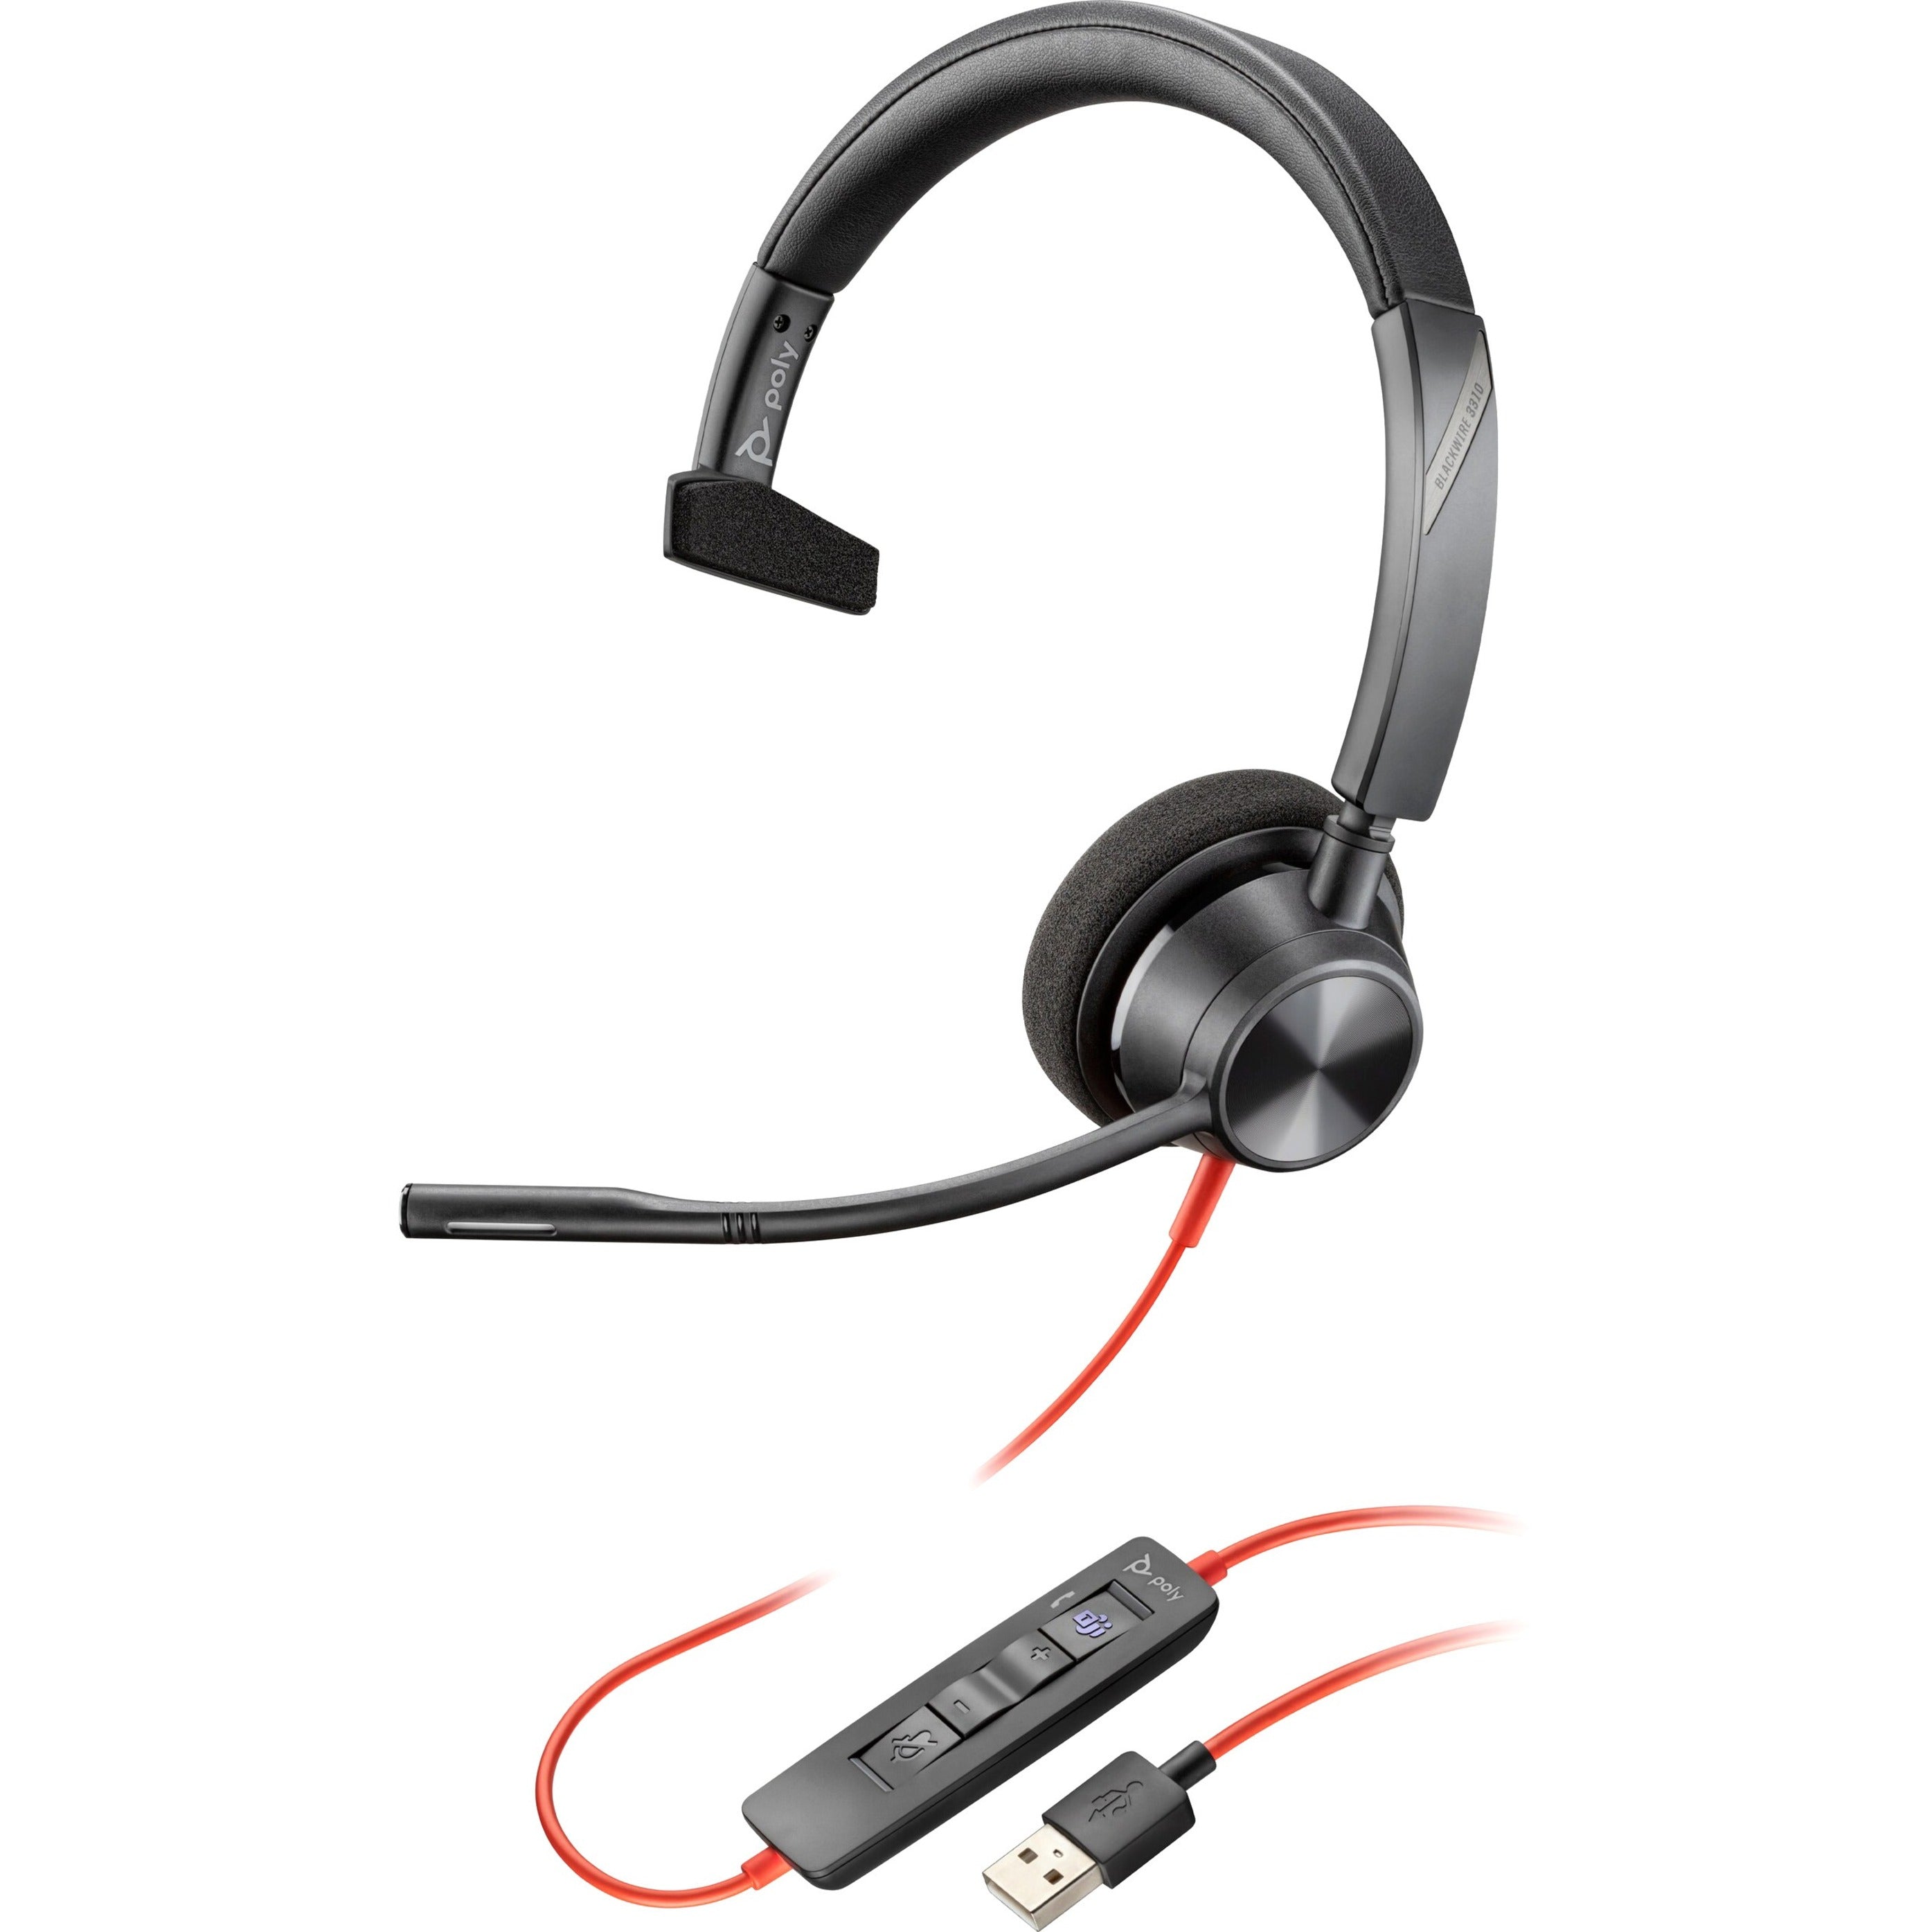 Poly 767F7AA Blackwire 3310 USB-A Headset, Monaural On-ear Headset with Flexible Boom Microphone, Office PC Tablet Voice Call Mac Compatible